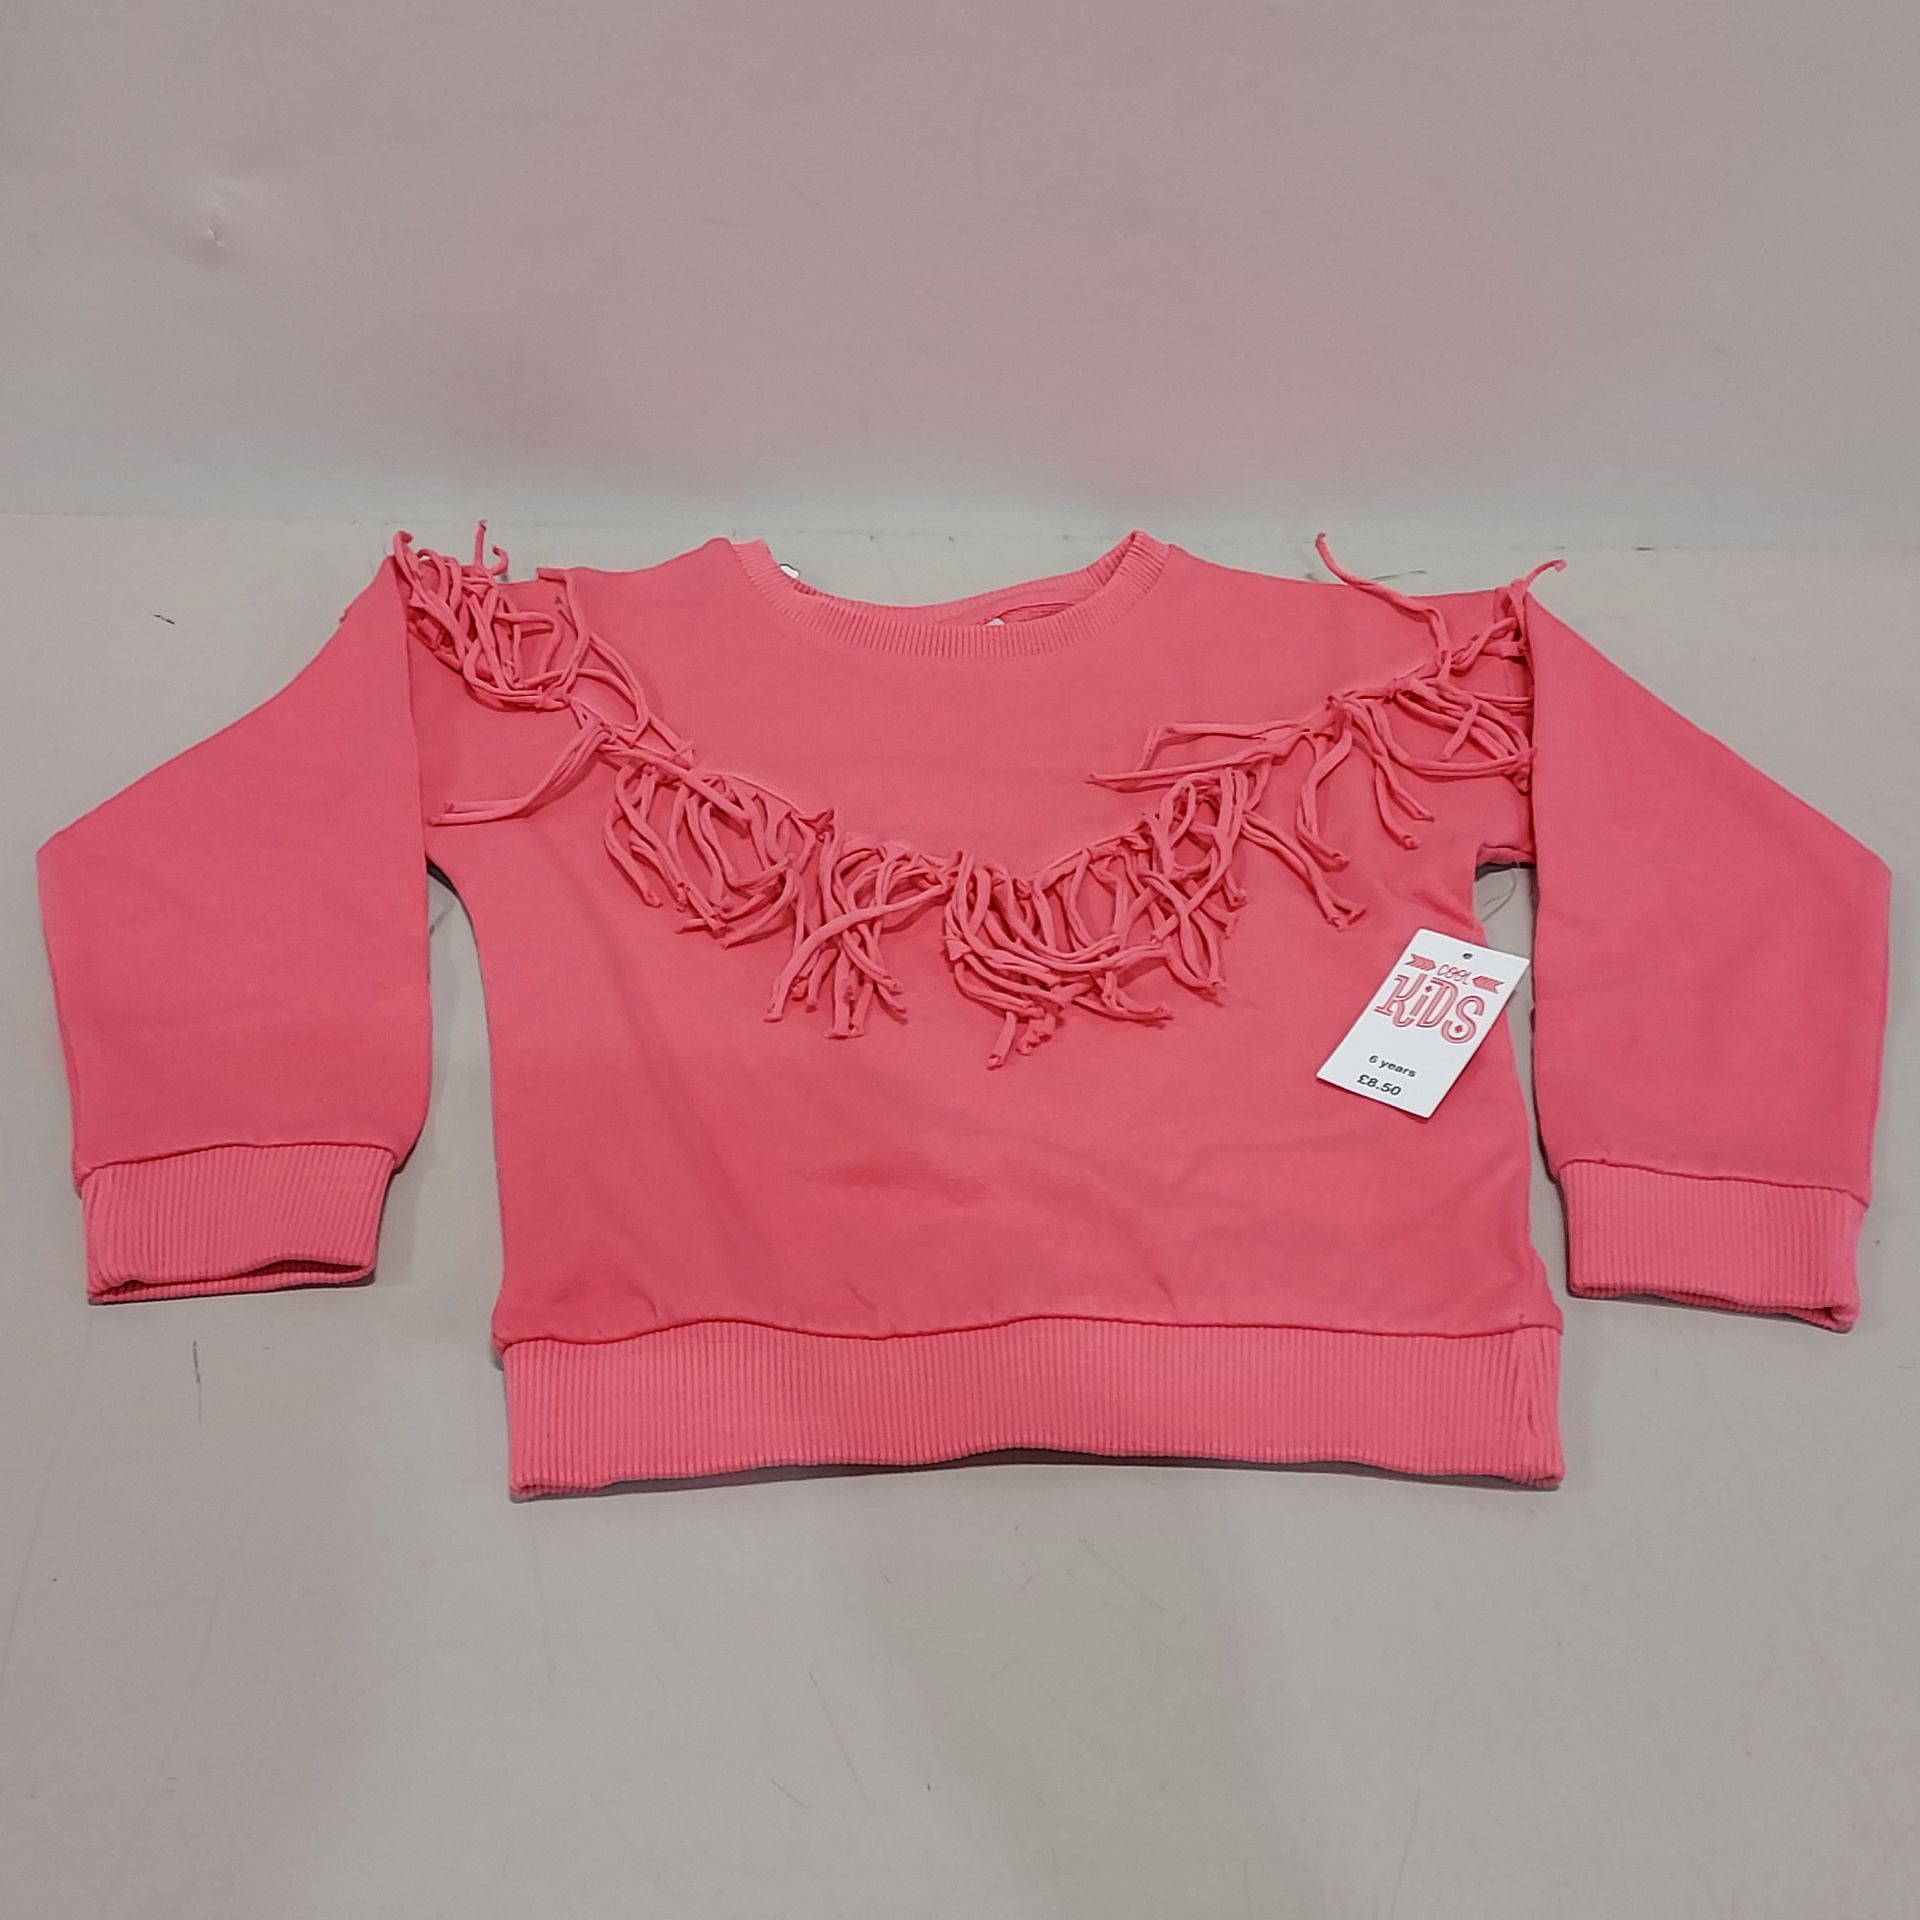 33 X BRAND NEW I LOVE GIRLSWEAR KIDS PINK FRILL TOPS - SIZE 6 YEARS - RRP £8.50pp